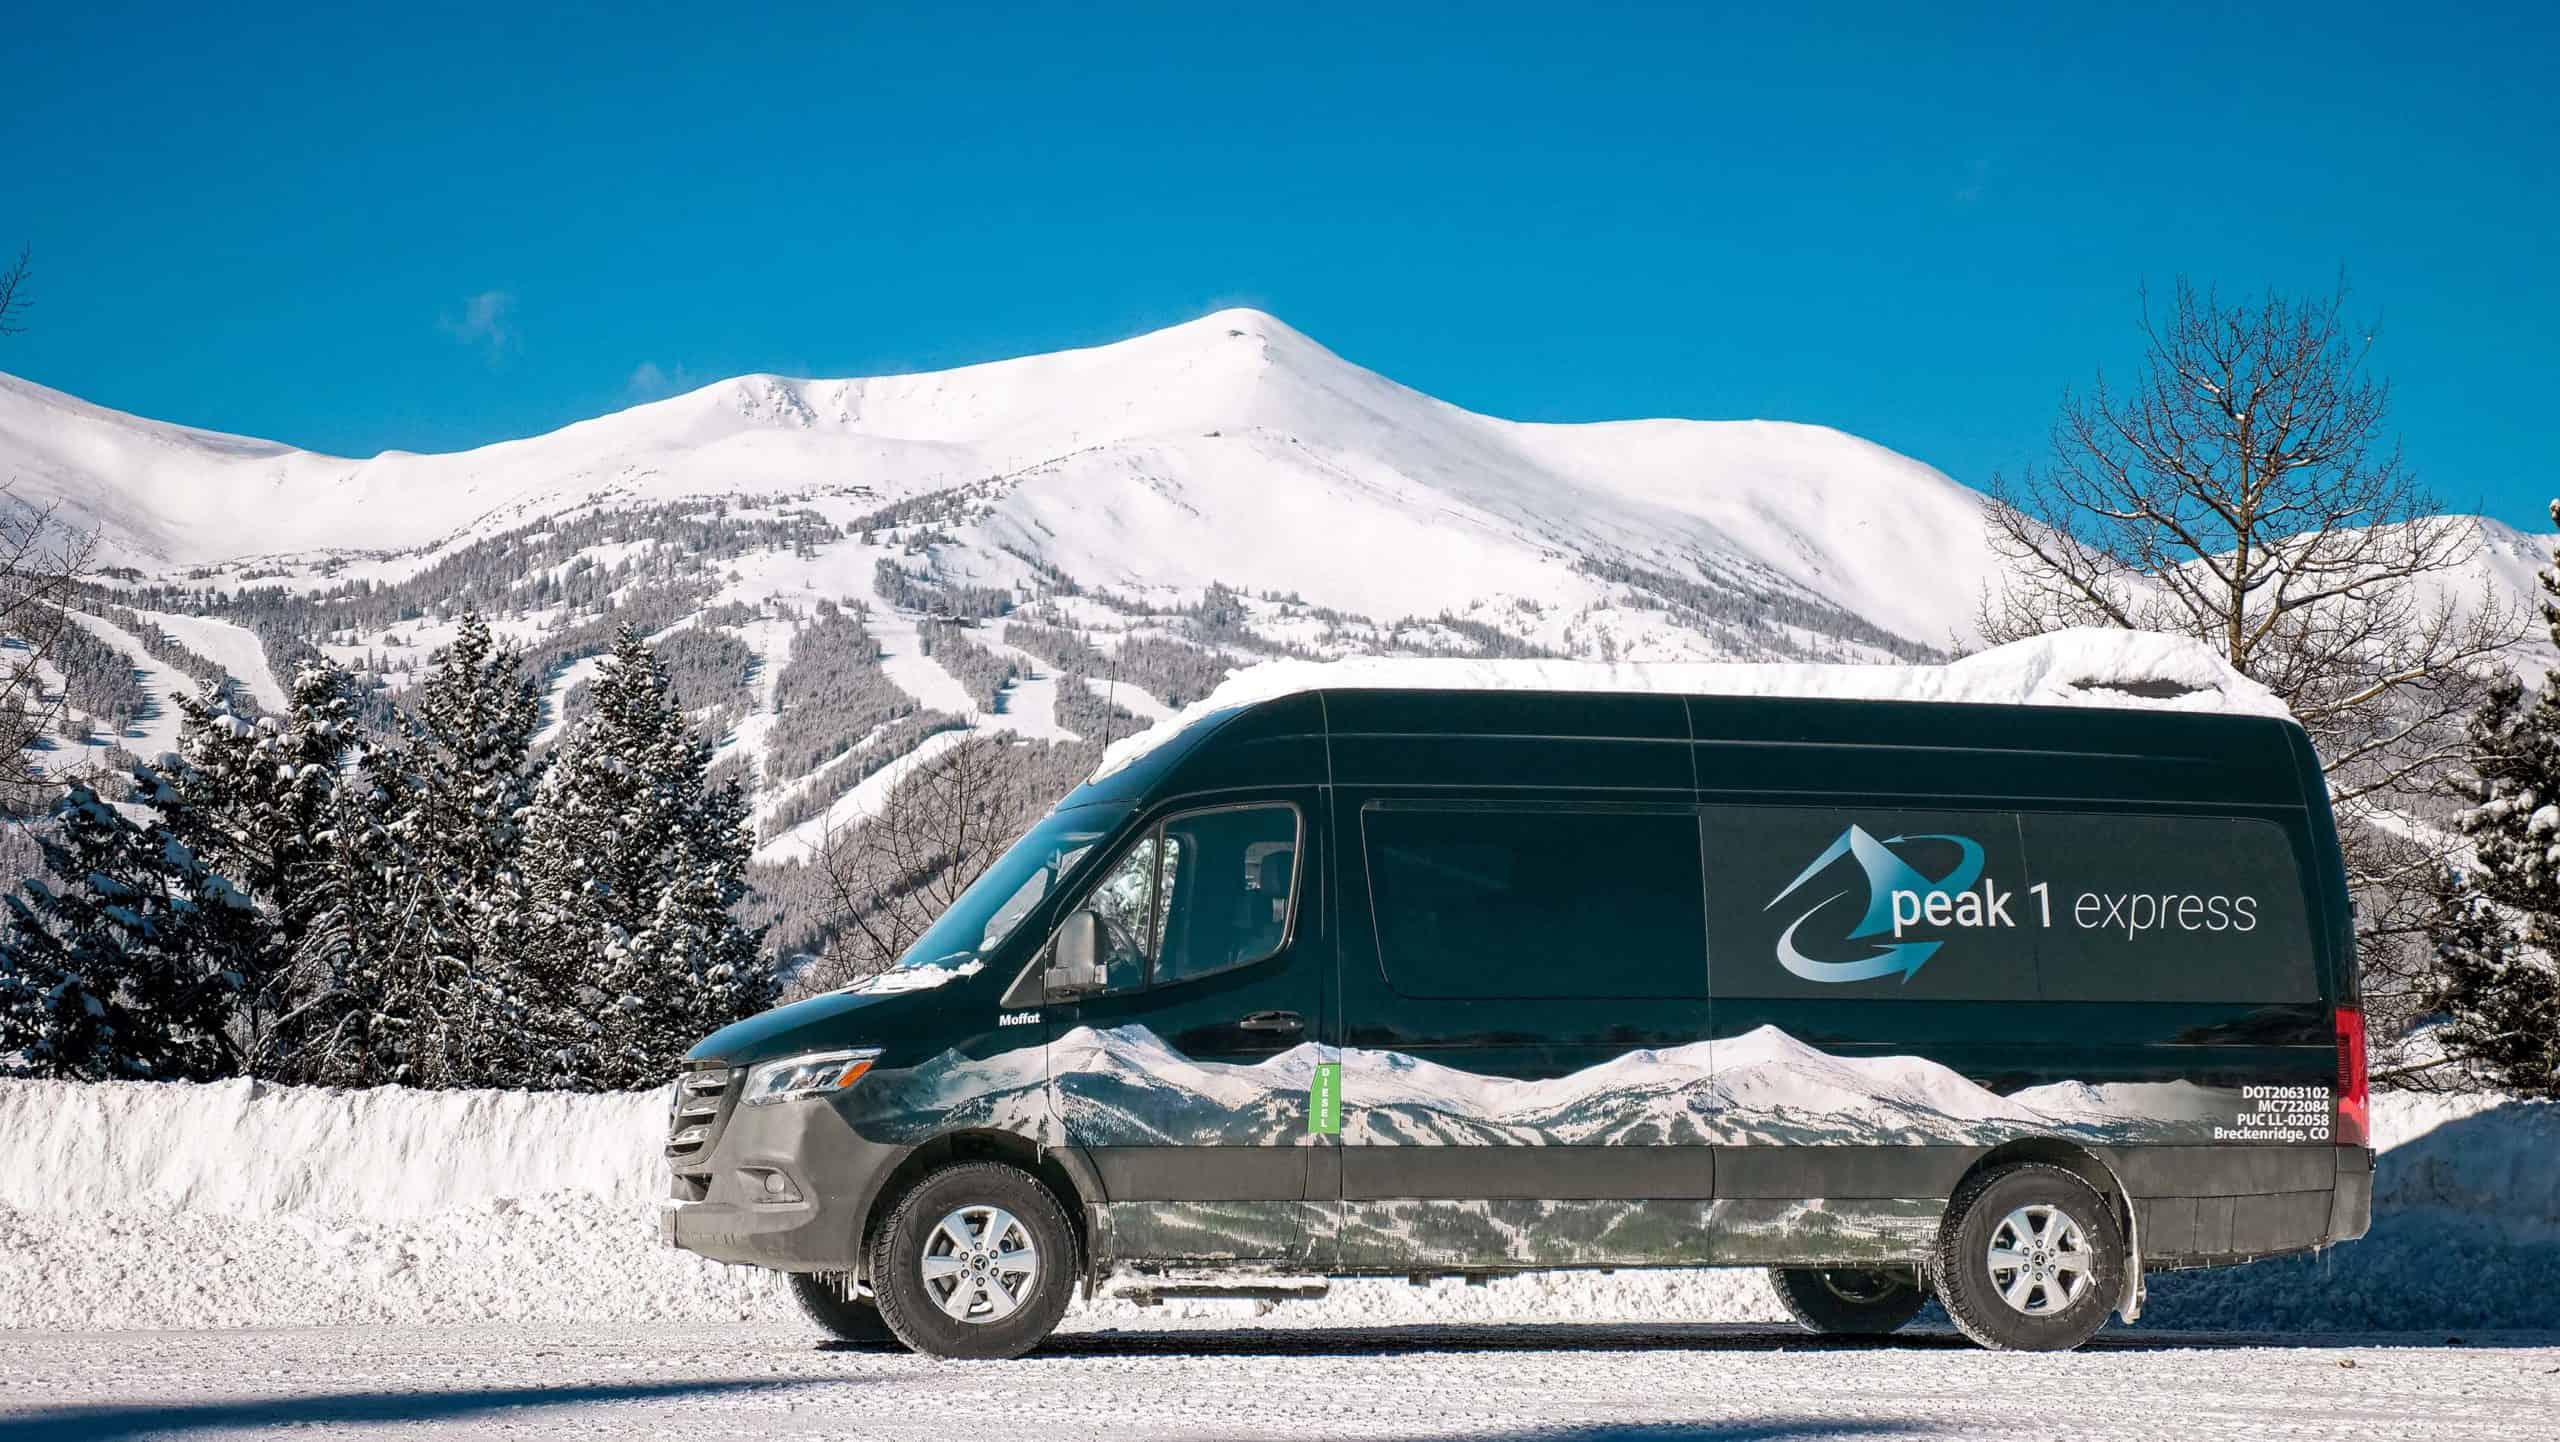 Peak 1 Express shuttle in the snow on boreas pass